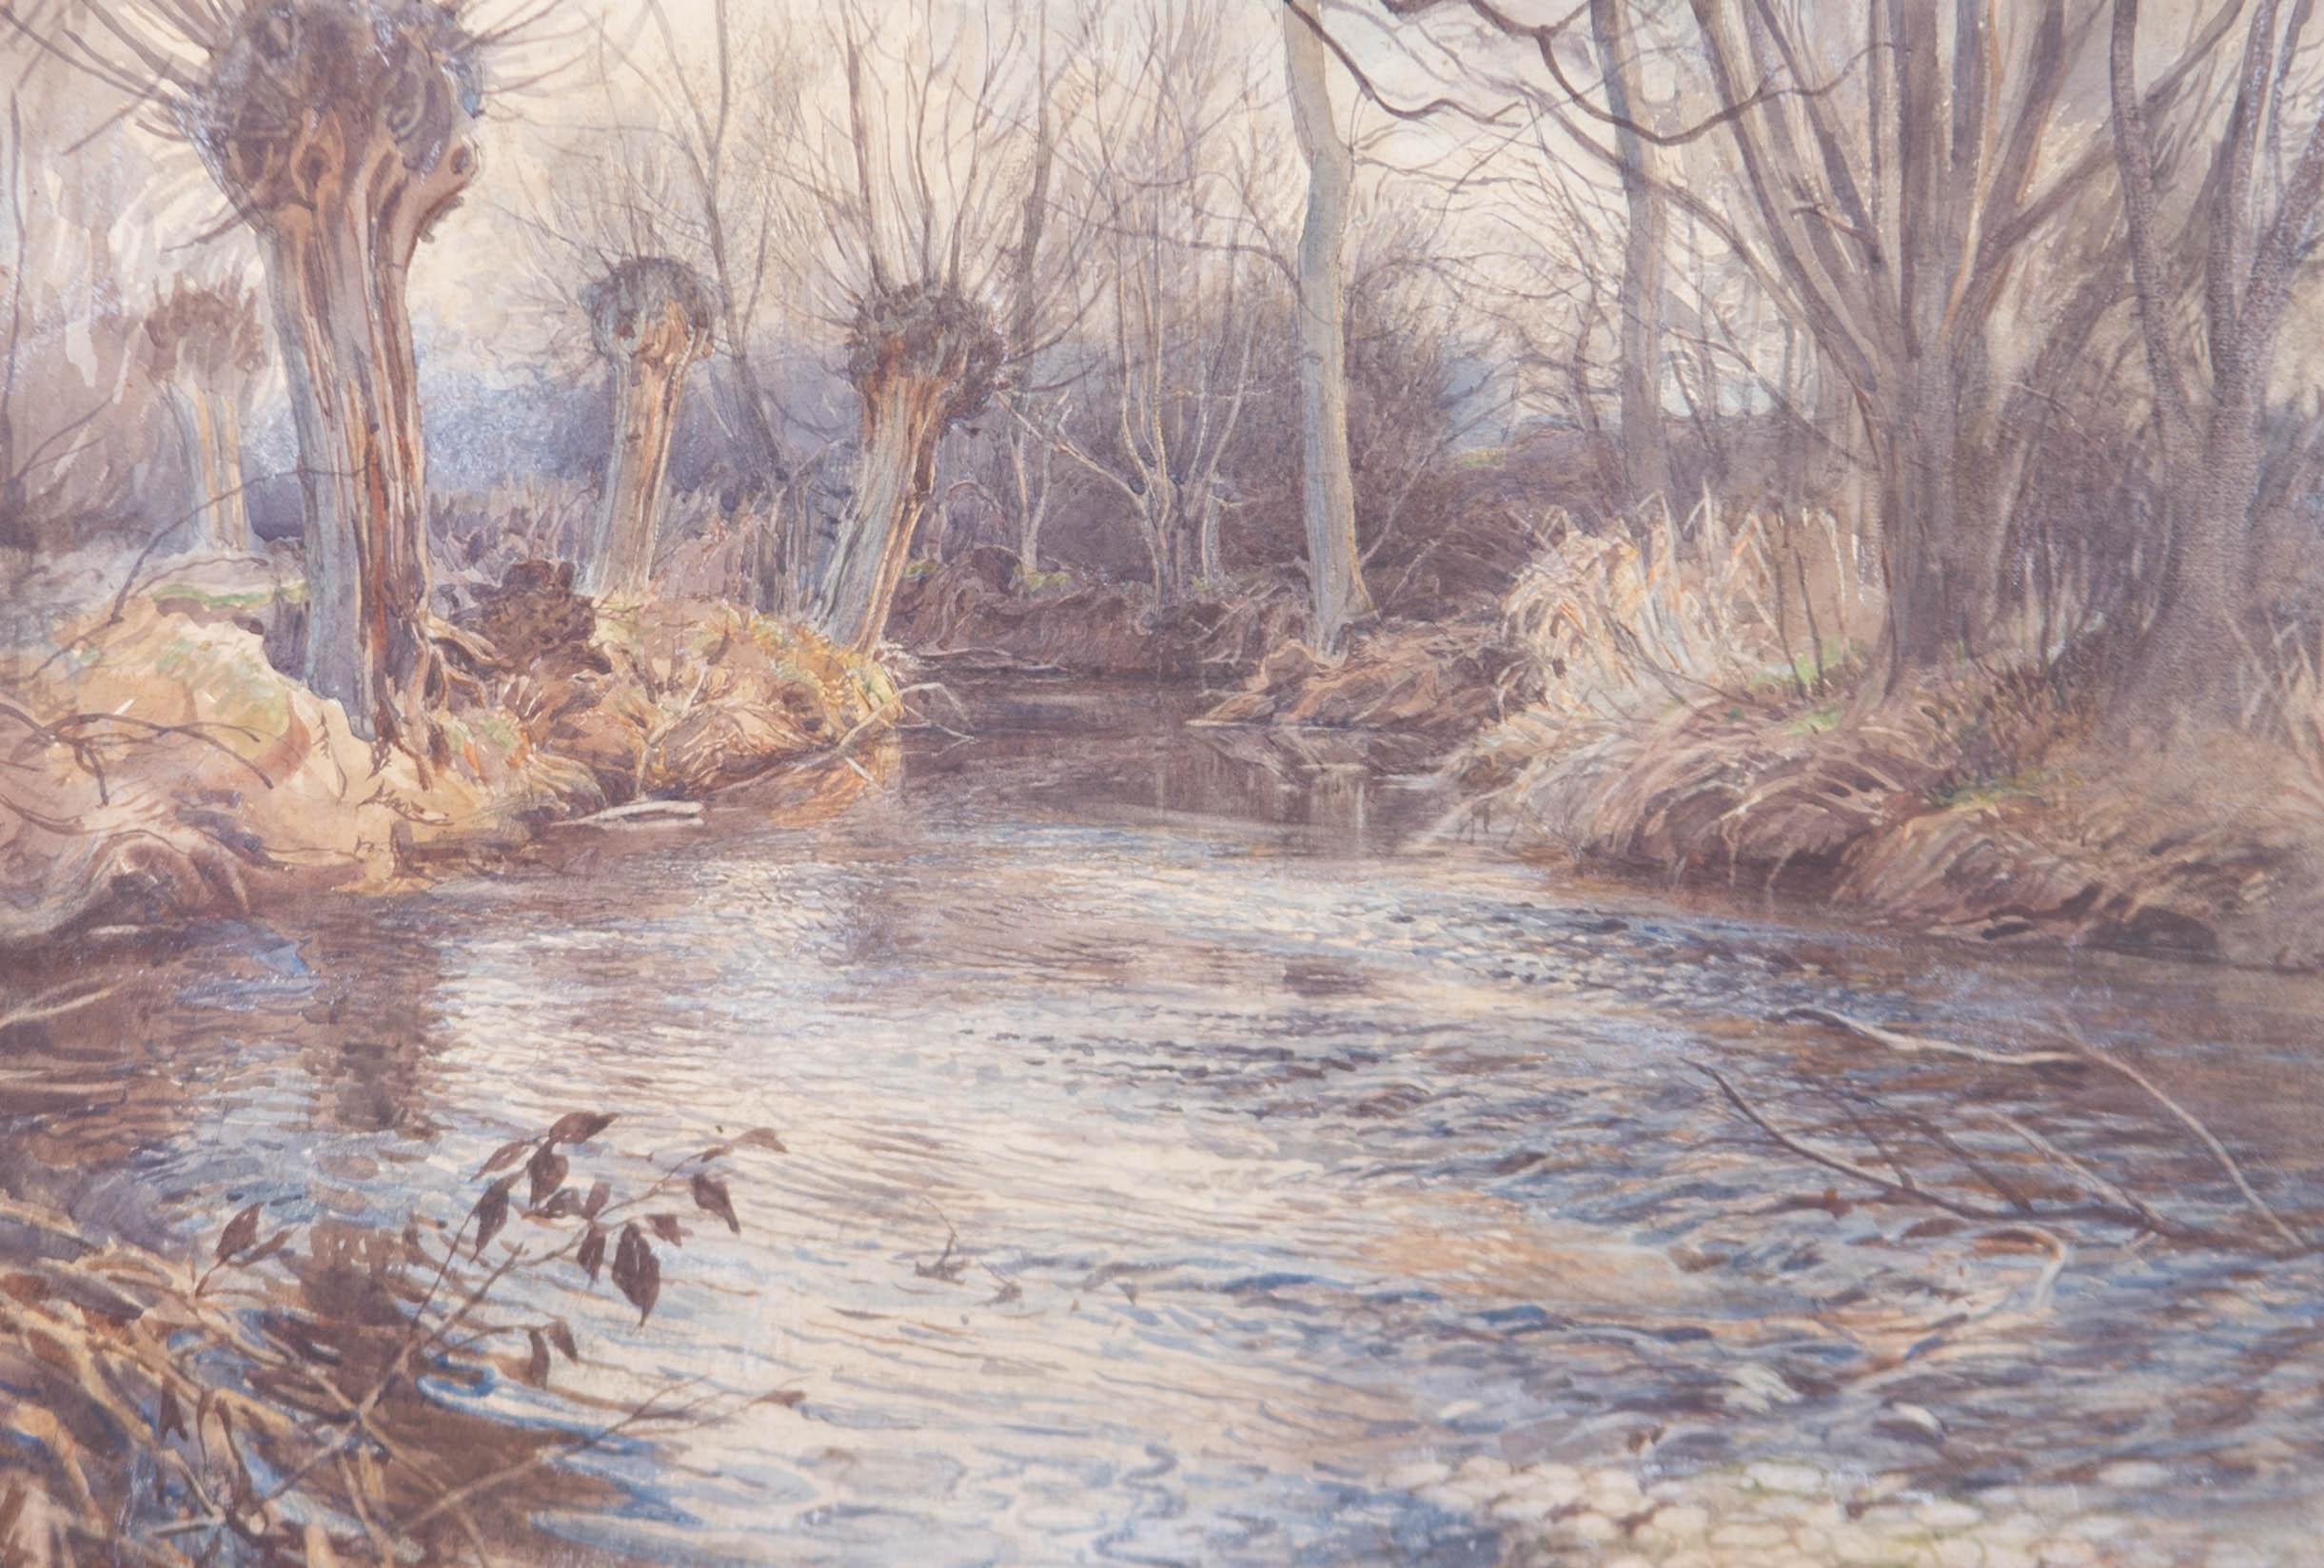 A very fine early 20th century watercolour landscape attributed to the English artist William Edward Wigley (1880-1943). Depicting an atmospheric winter river scene with willow trees lining the bank. Excellently presented in a washline mount and